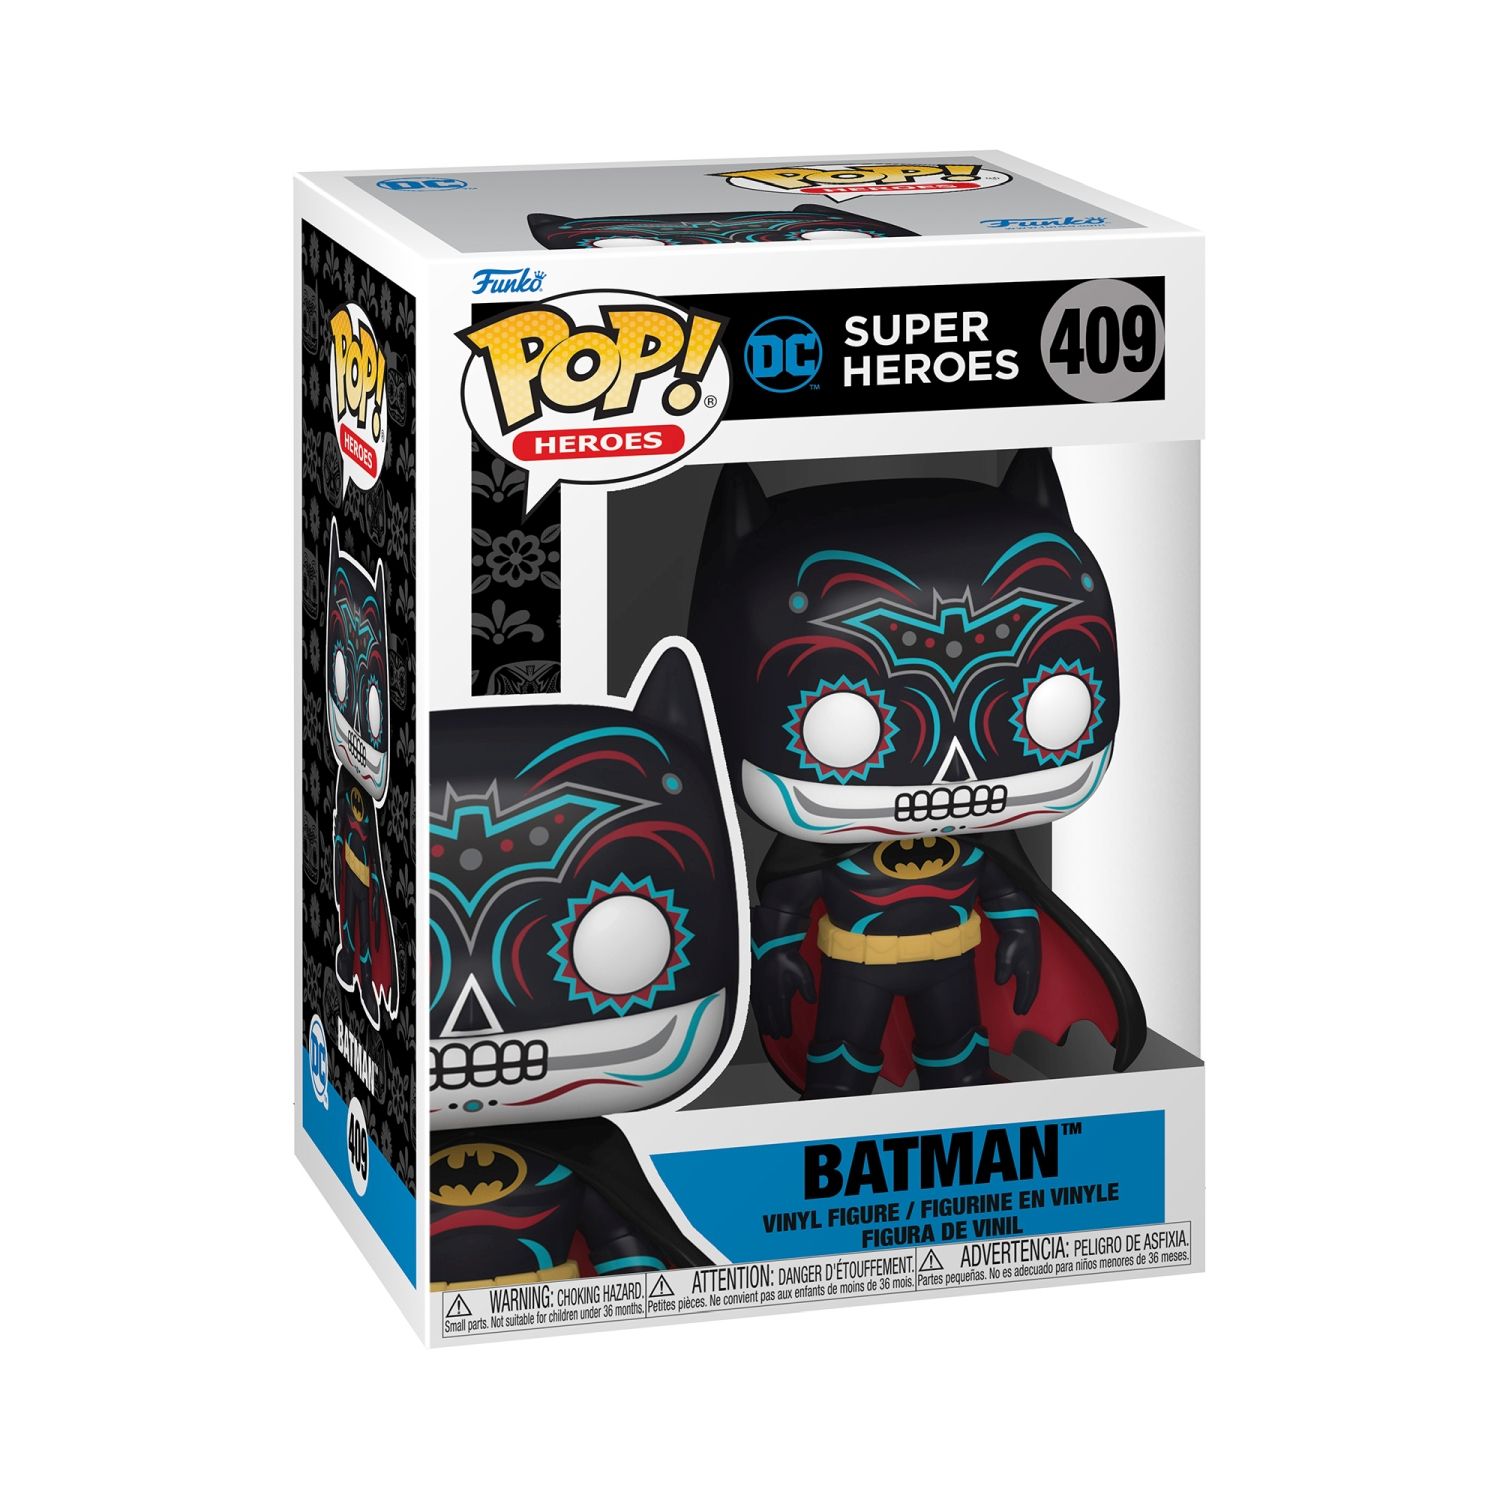 Funko POP DC Comics Heroes Collectible featuring Batman from DC Super Heroes